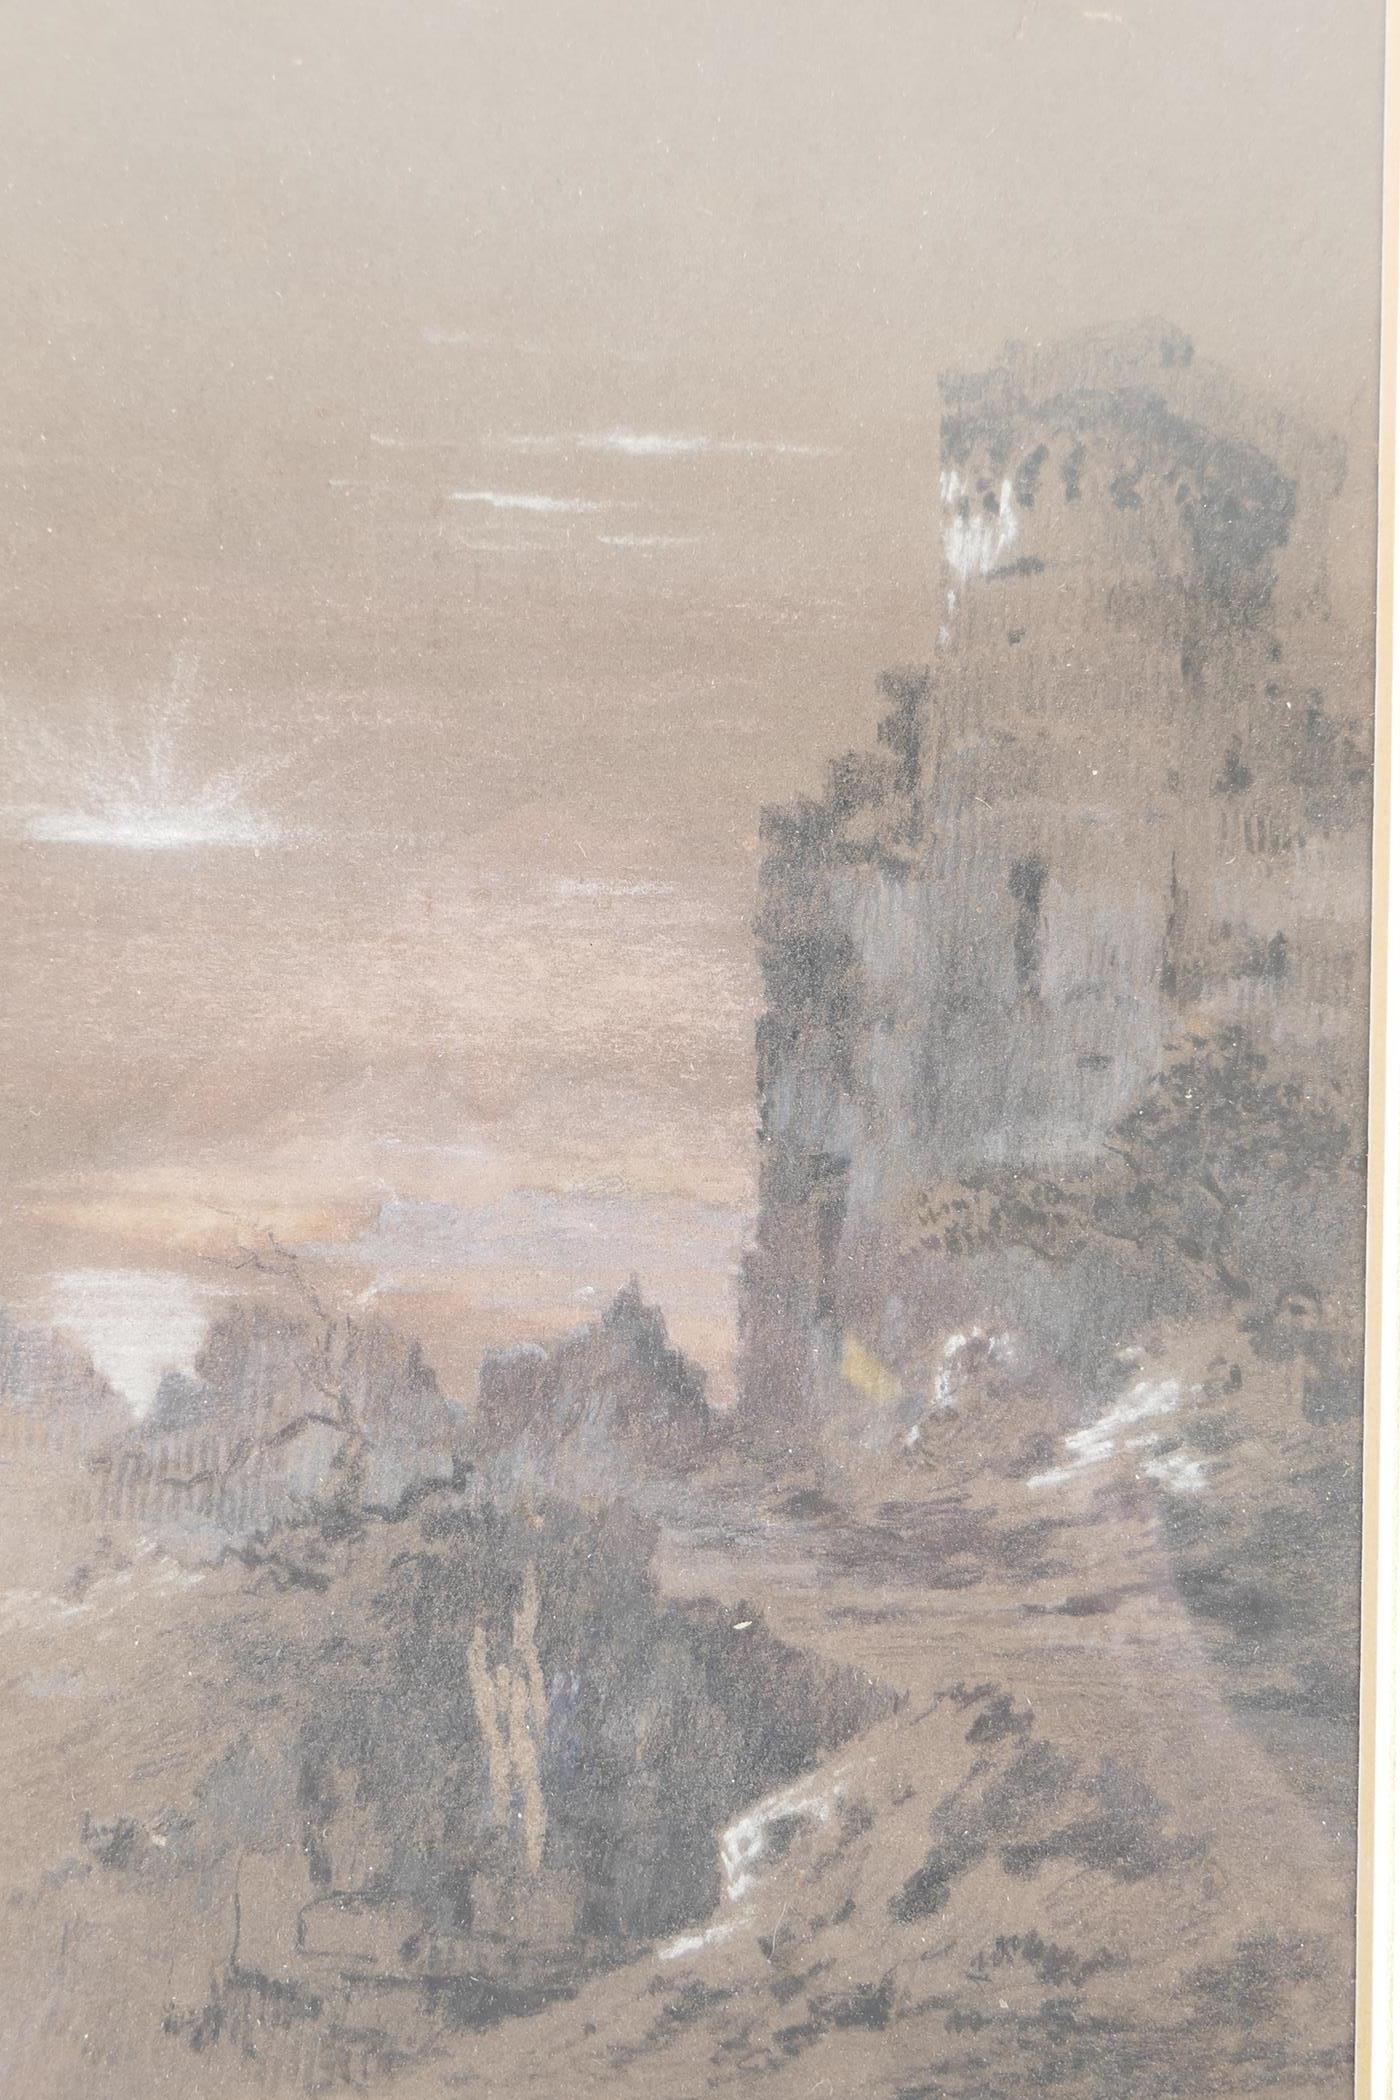 Ruins in a landscape at sunset, C19th charcoal drawing highlighted with white, in the manner of John